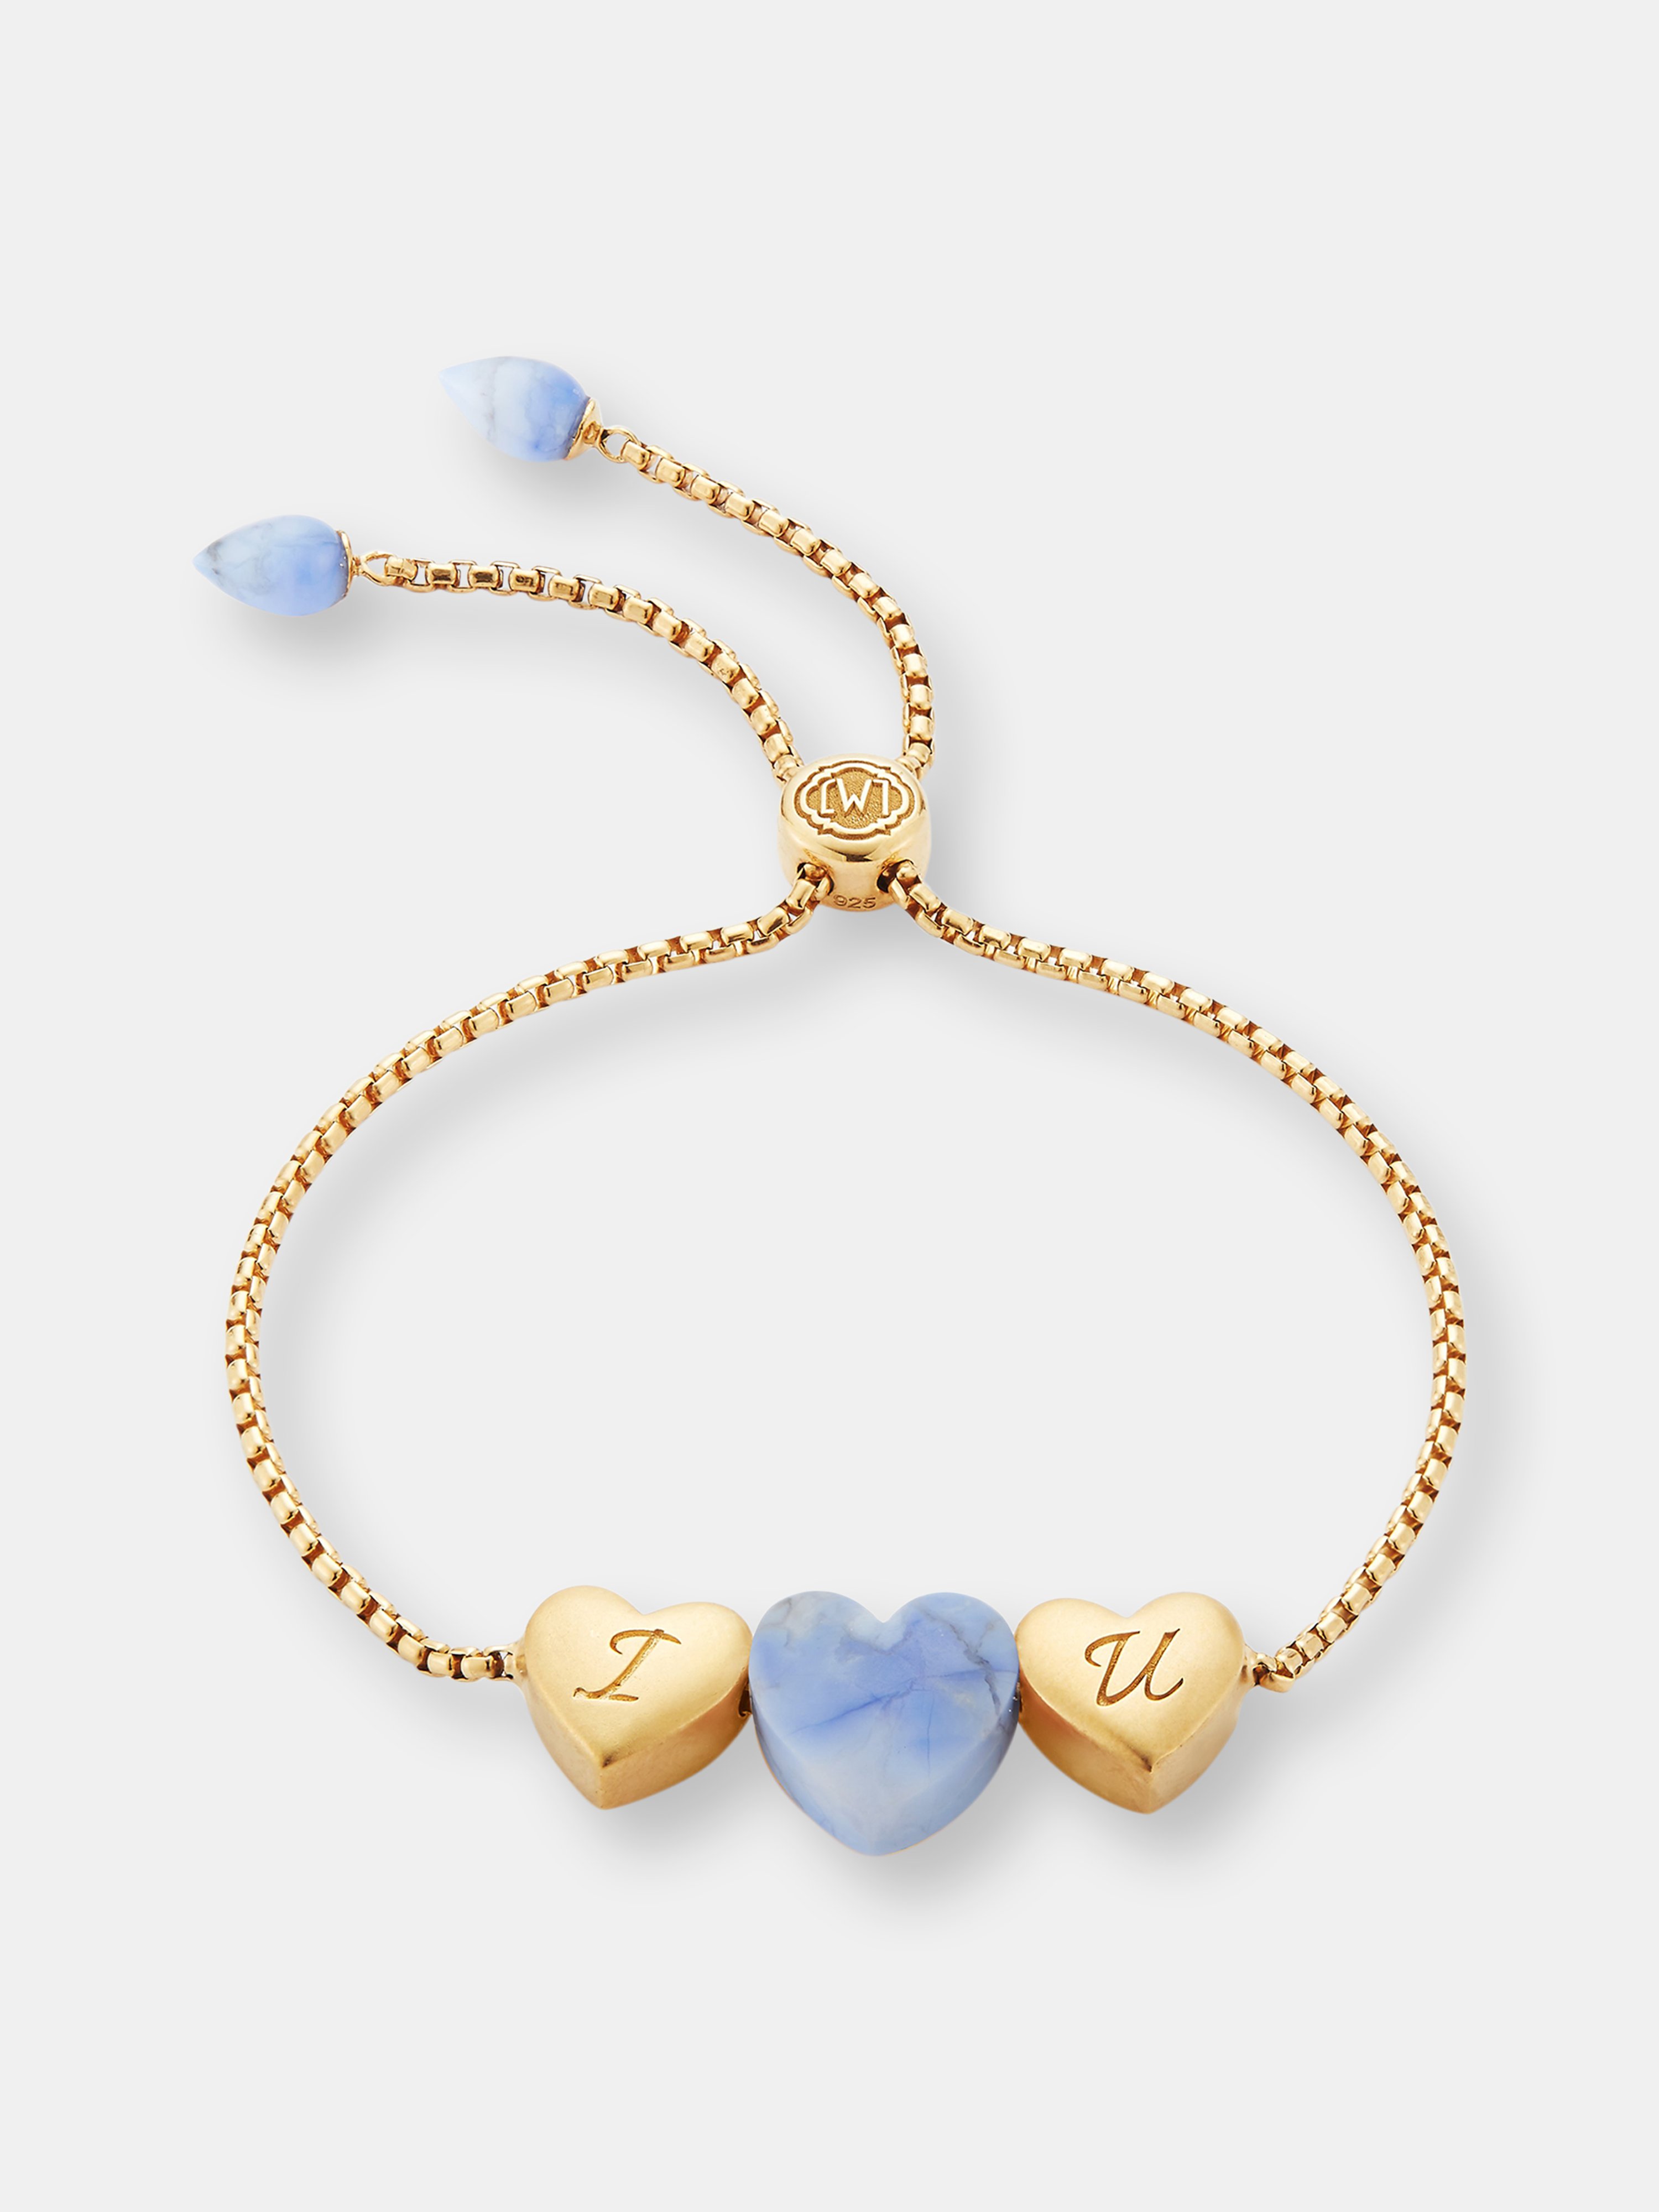 Luvmyjewelry Luv Me Blue Howlite Bolo Adjustable I Love You Heart Bracelet In 14k Yellow Gold Plated